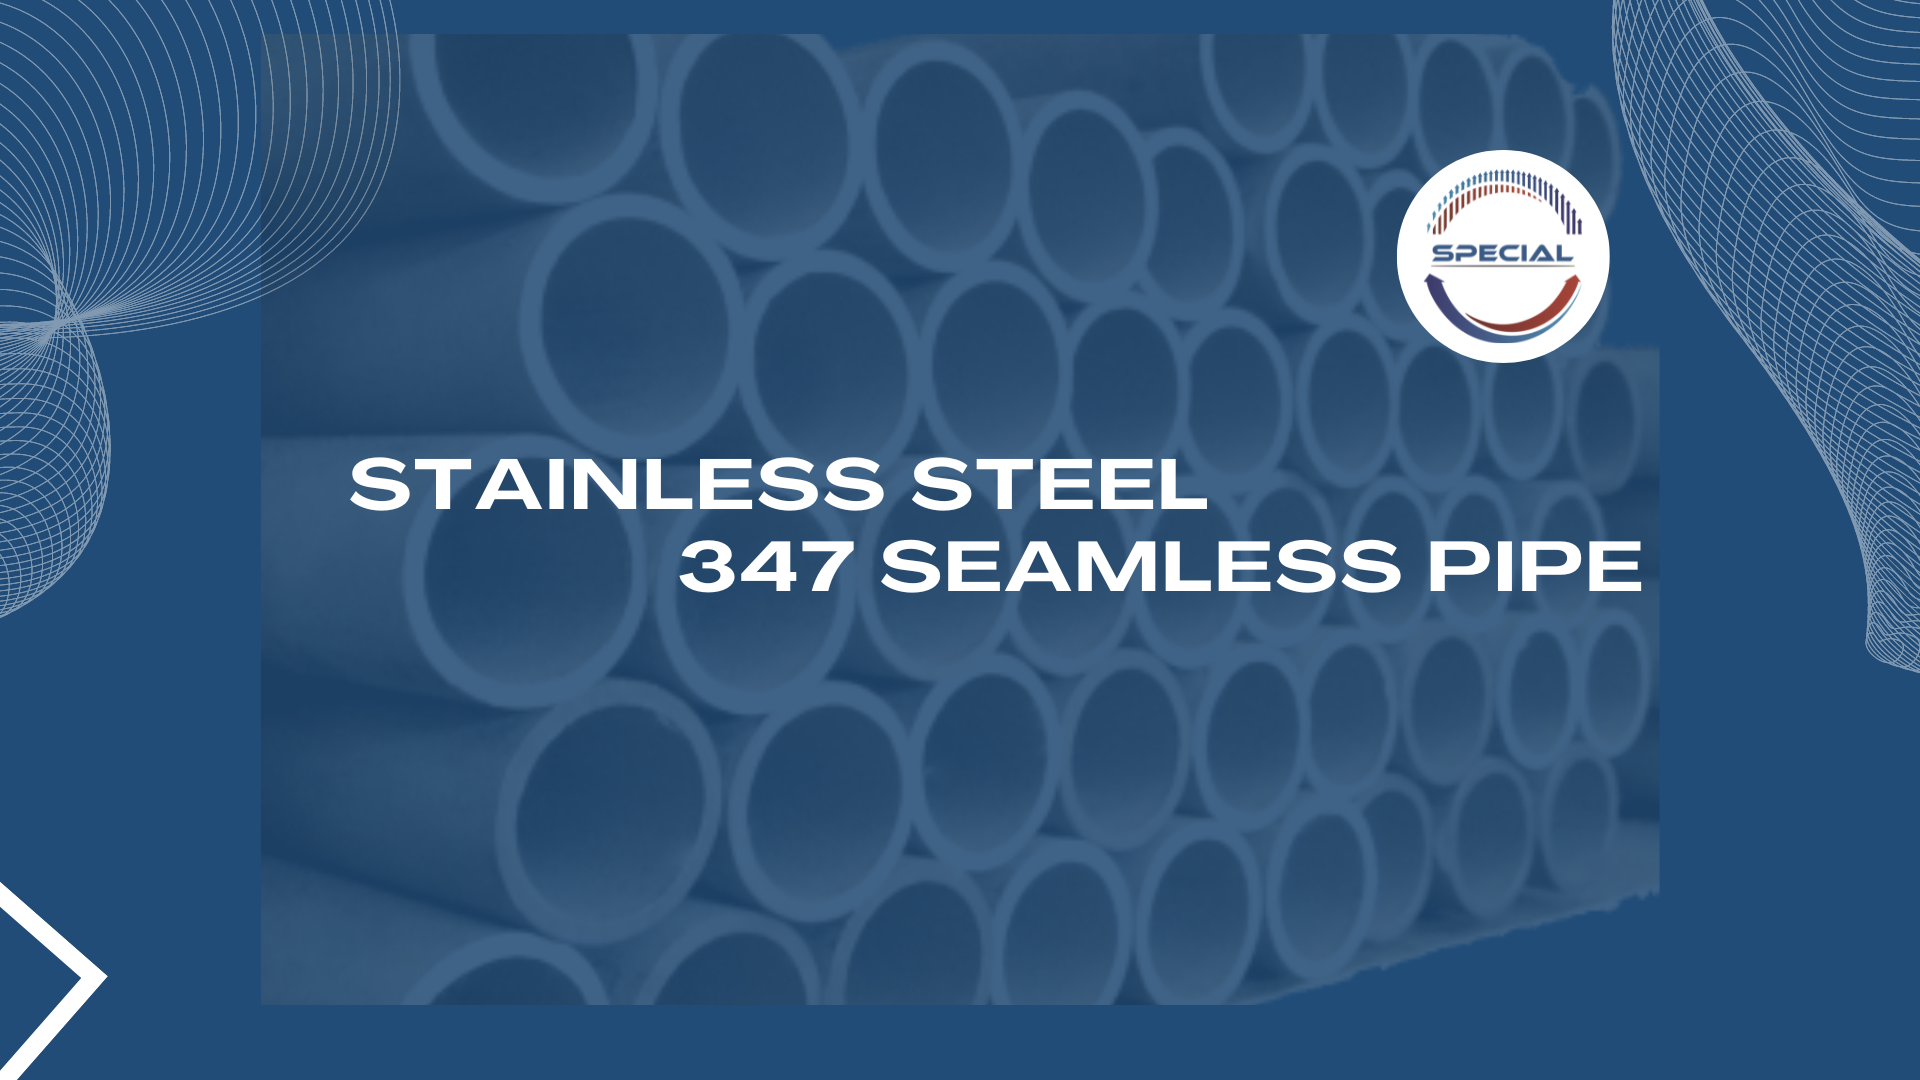 Stainless steel 347 seamless pipe